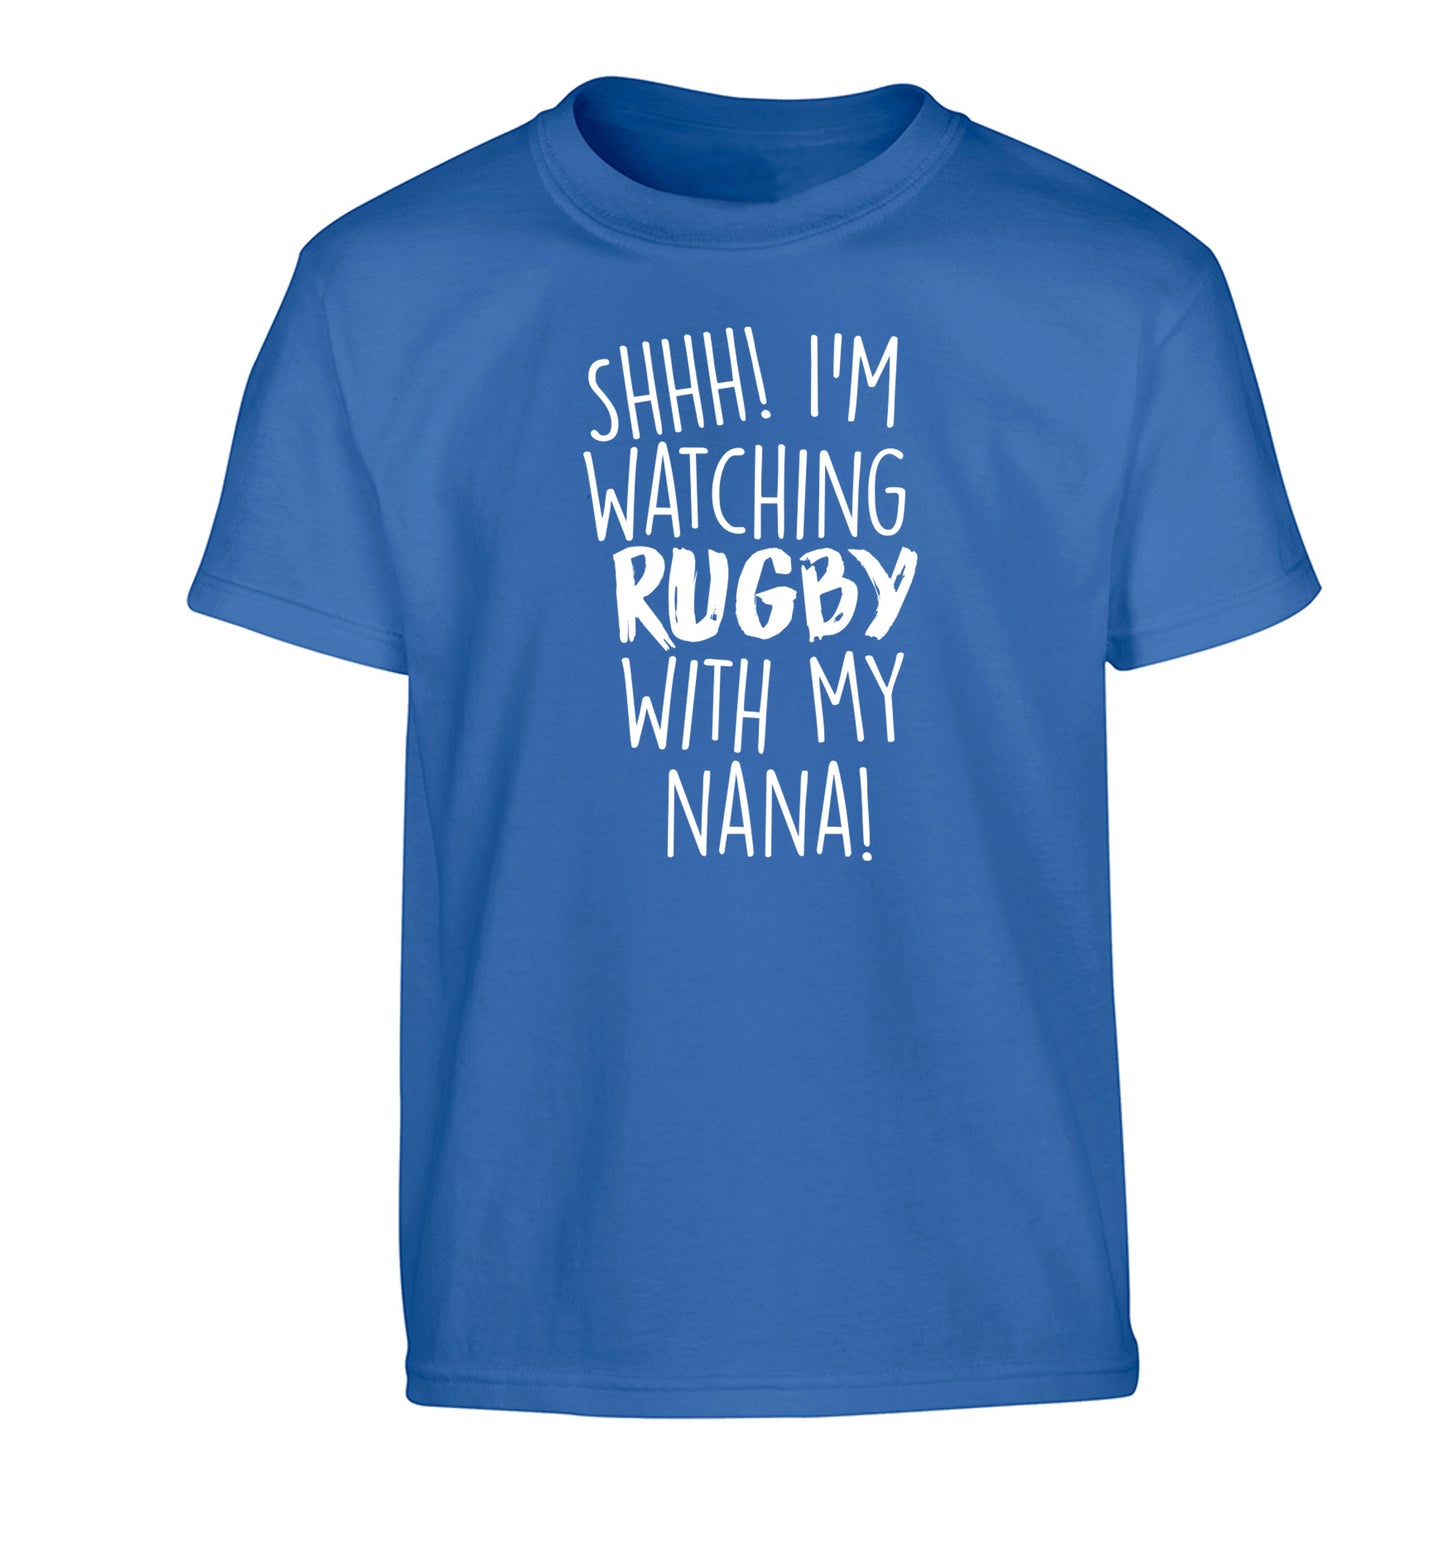 Shh I'm watching rugby with my nana Children's blue Tshirt 12-13 Years